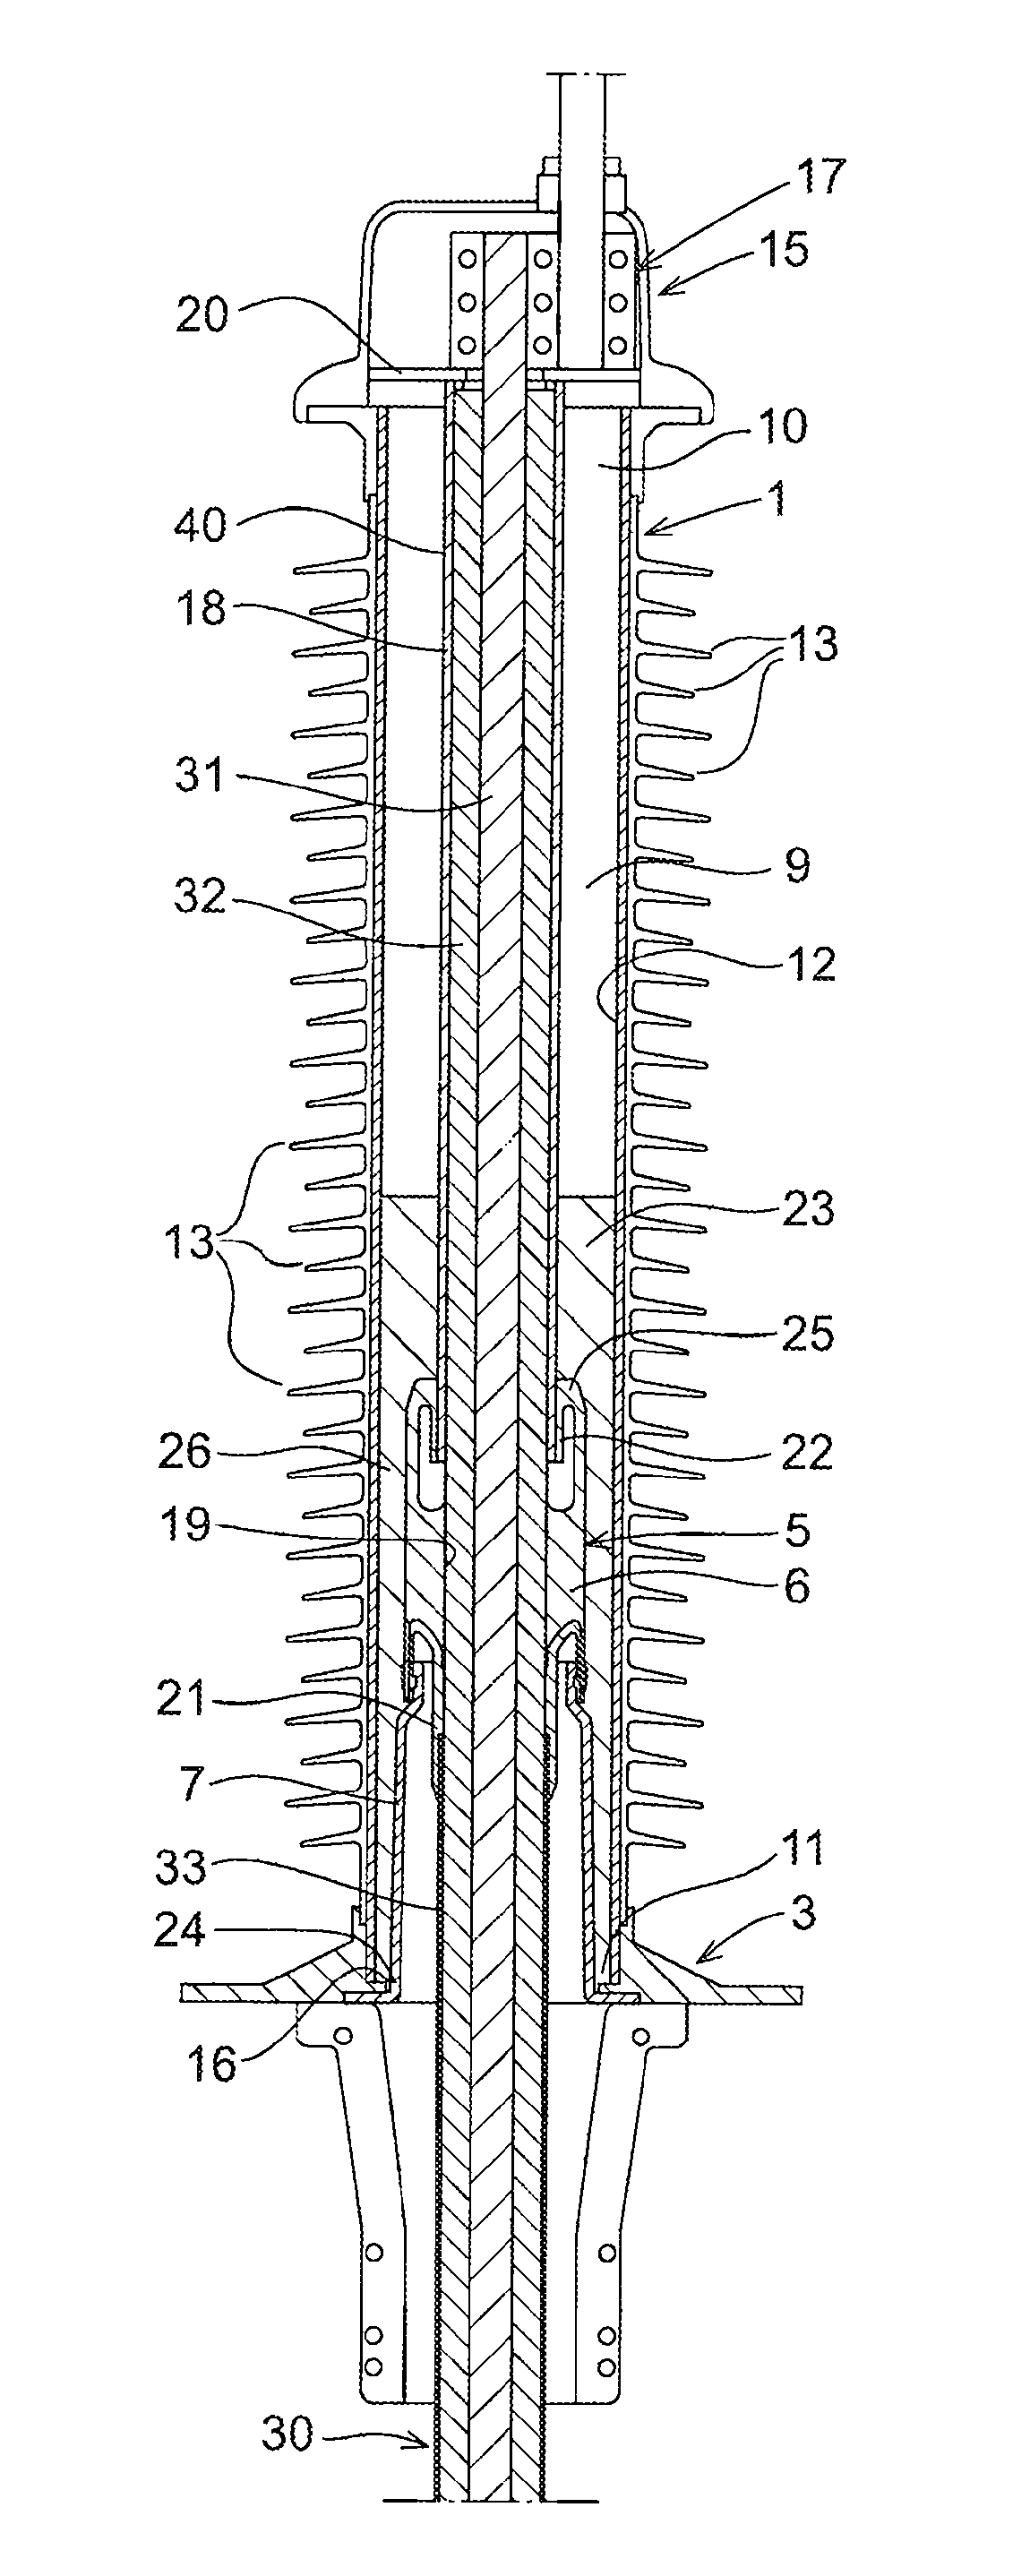 Cable Termination Device, A Method For Prefabricating A Cable Termination Device And A Method For Achieving A Cable Termination